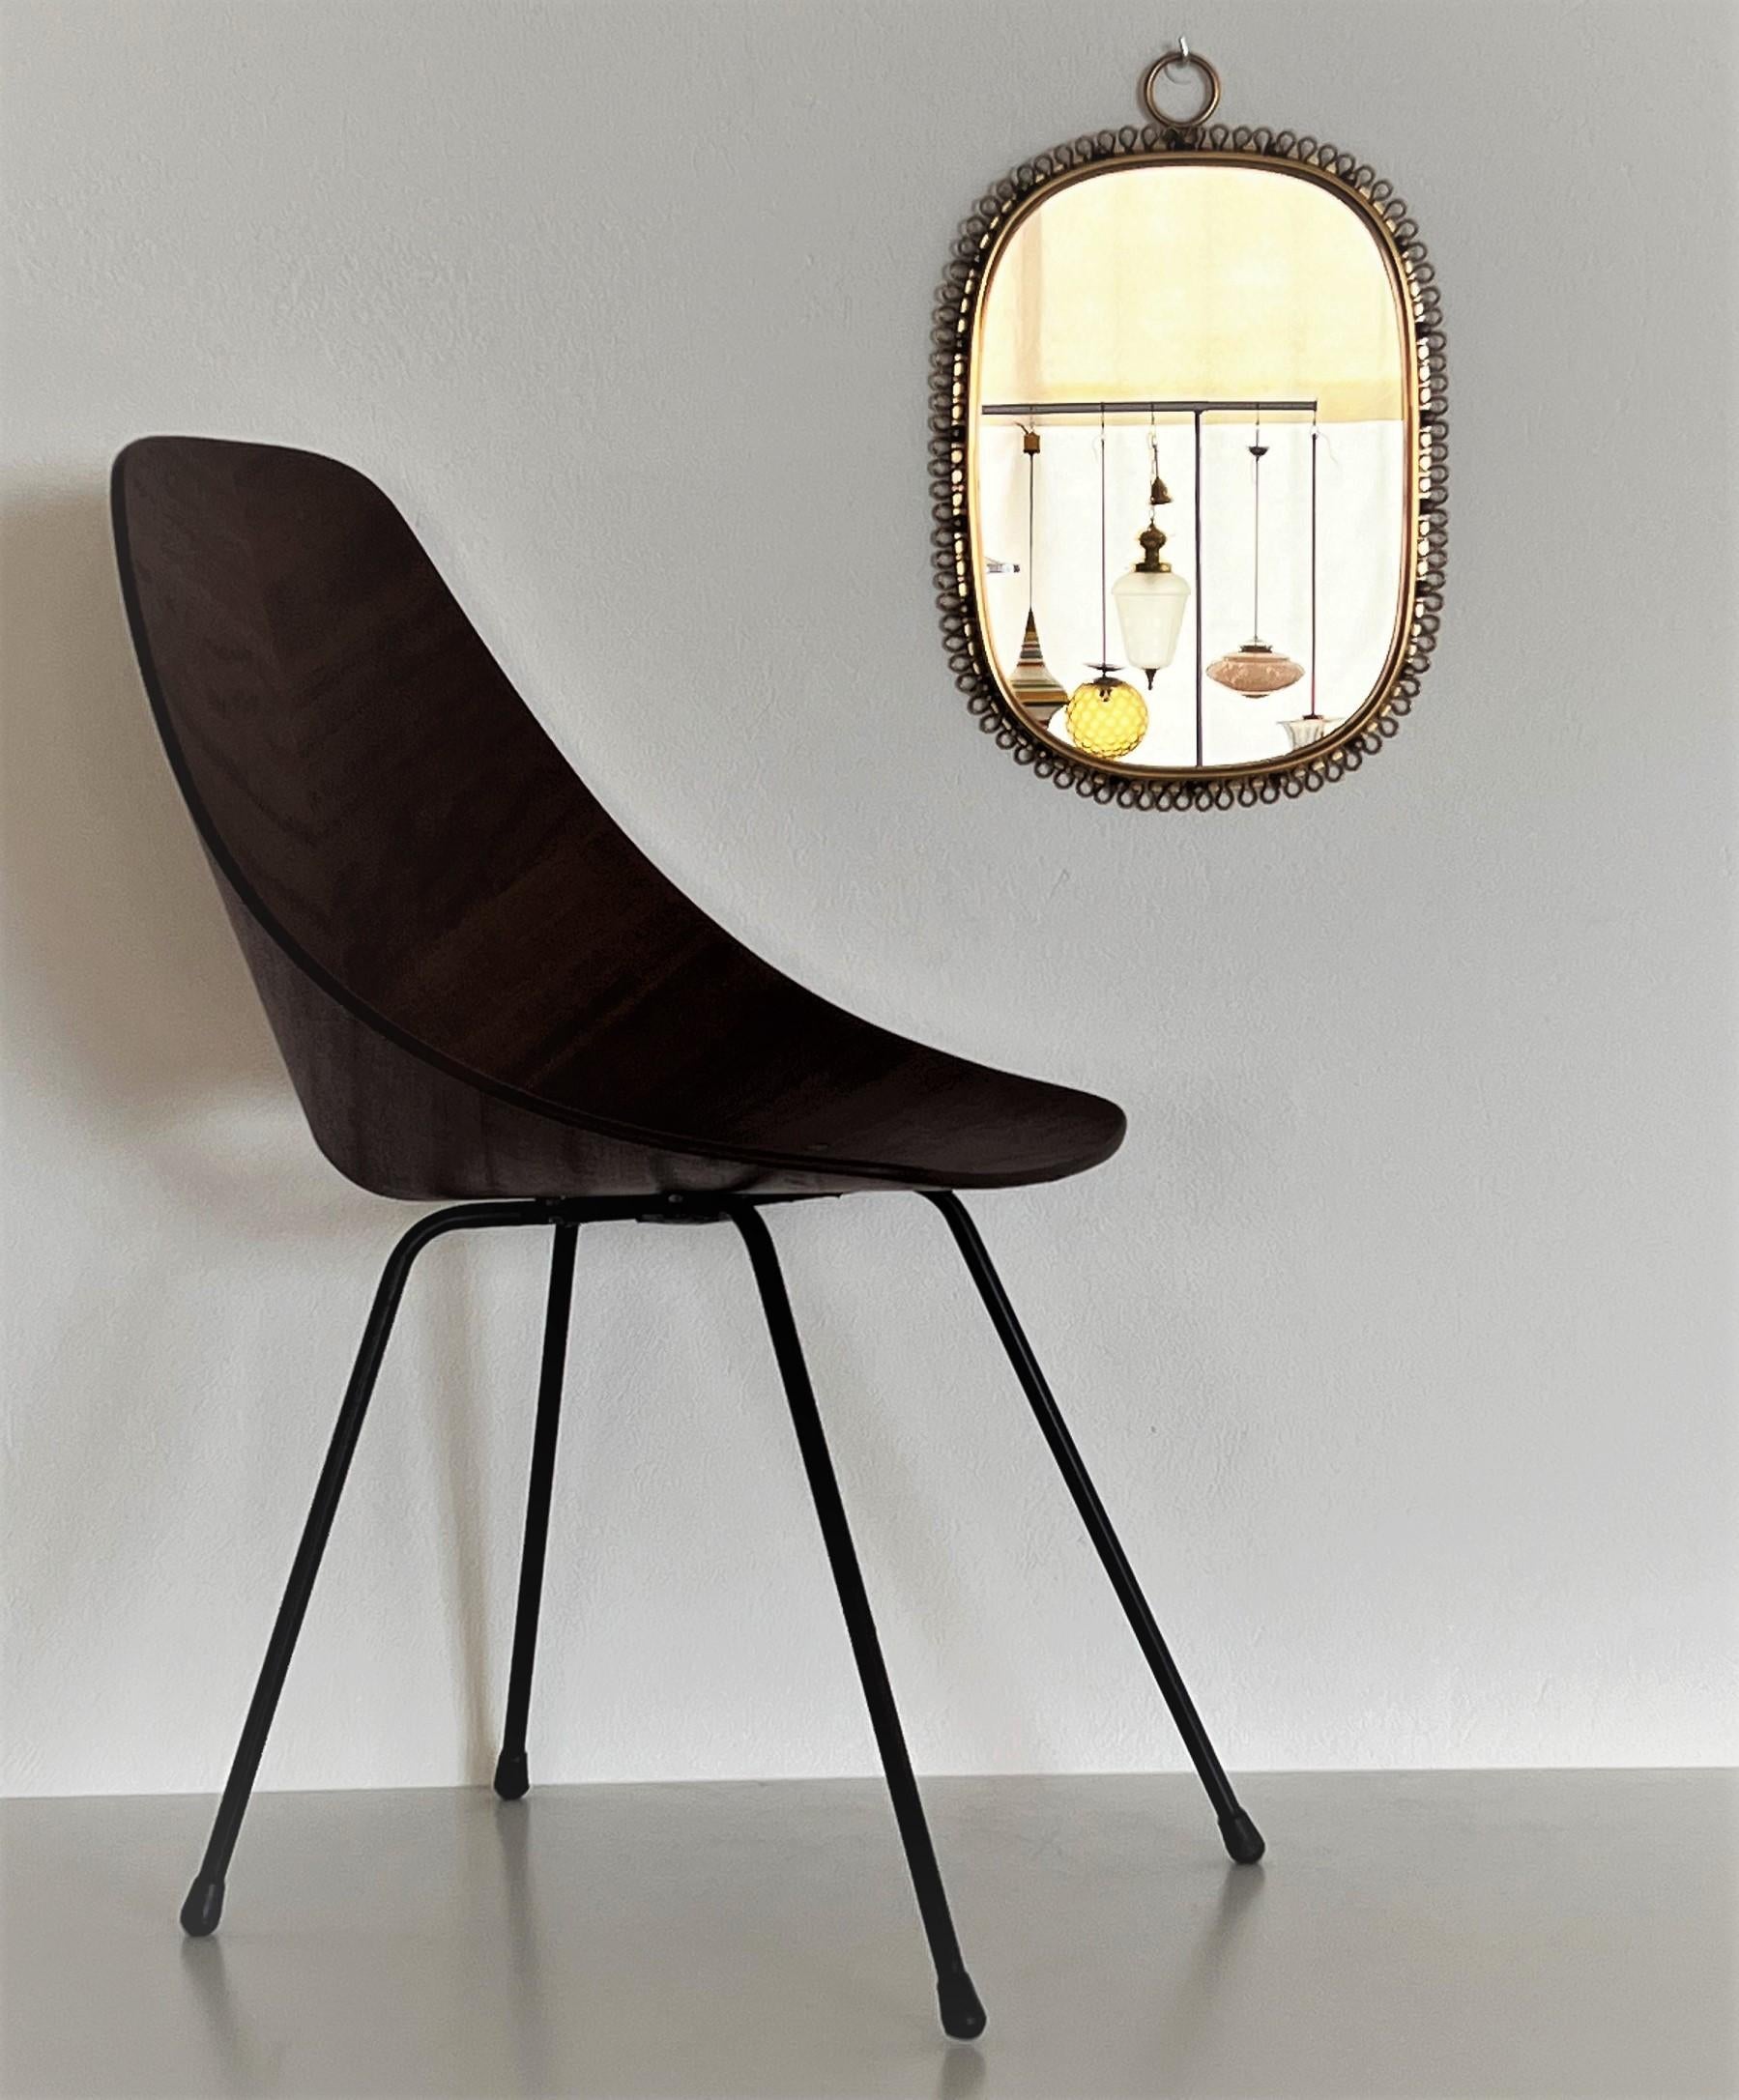 Swedish Wall Mirror with Loop Frame in Brass by Josef Frank for Svenskt Tenn, 1950s